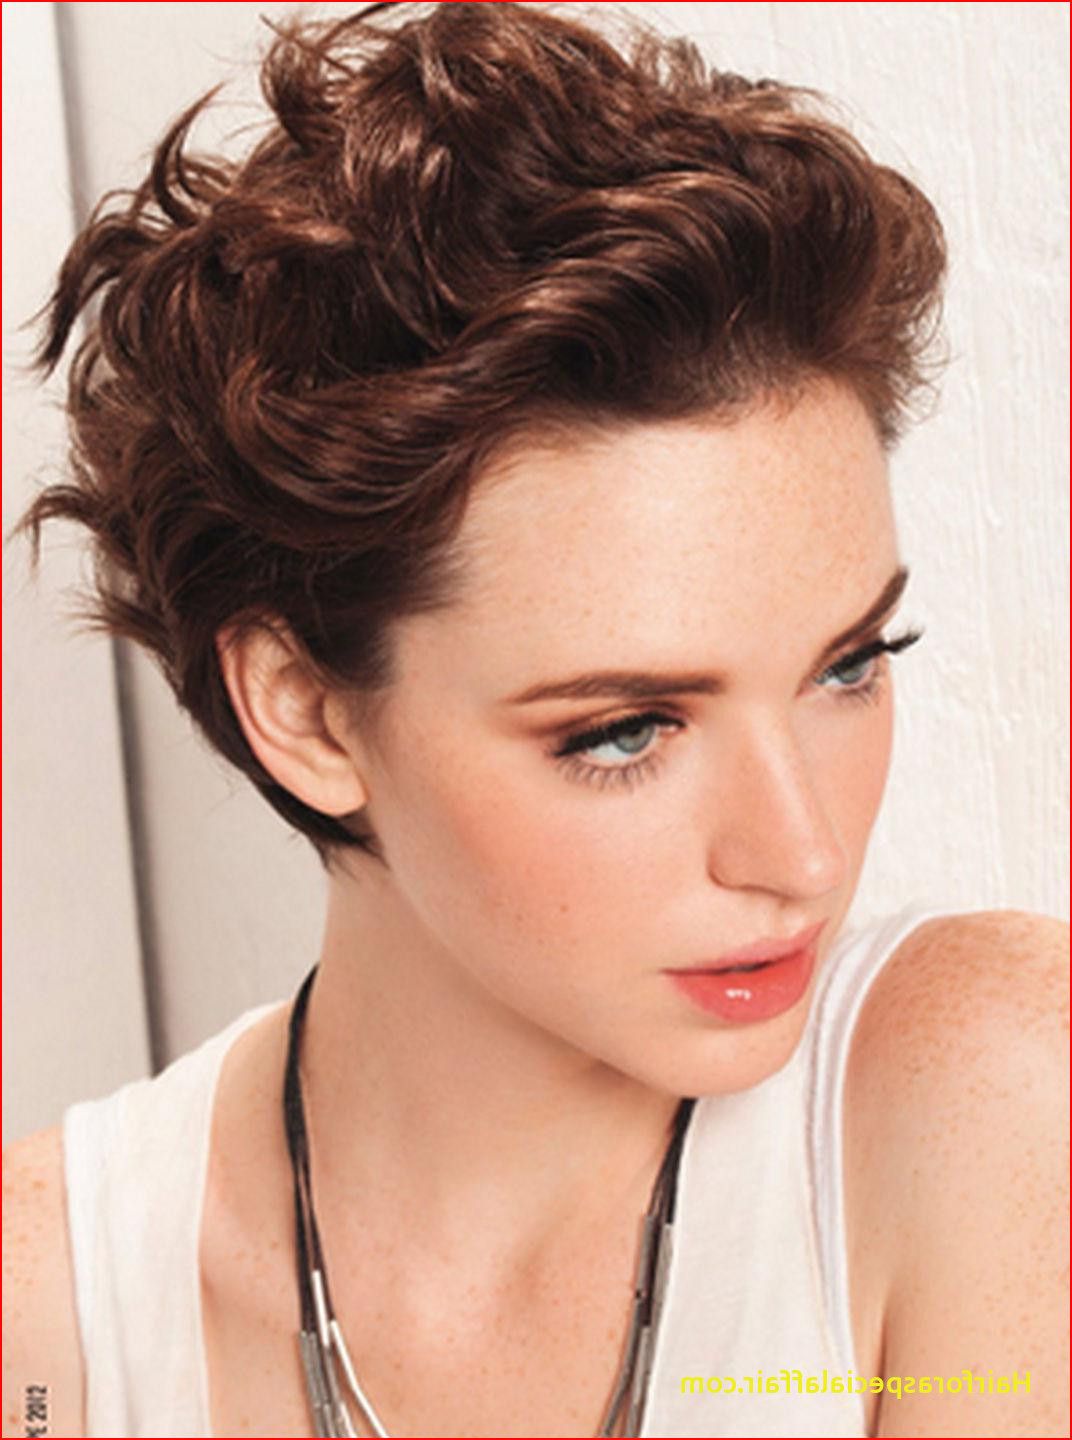 Short Haircuts For Women With Thick Wavy Hair Cute Short Haircuts Within Short Hair Styles For Thick Wavy Hair (View 8 of 25)